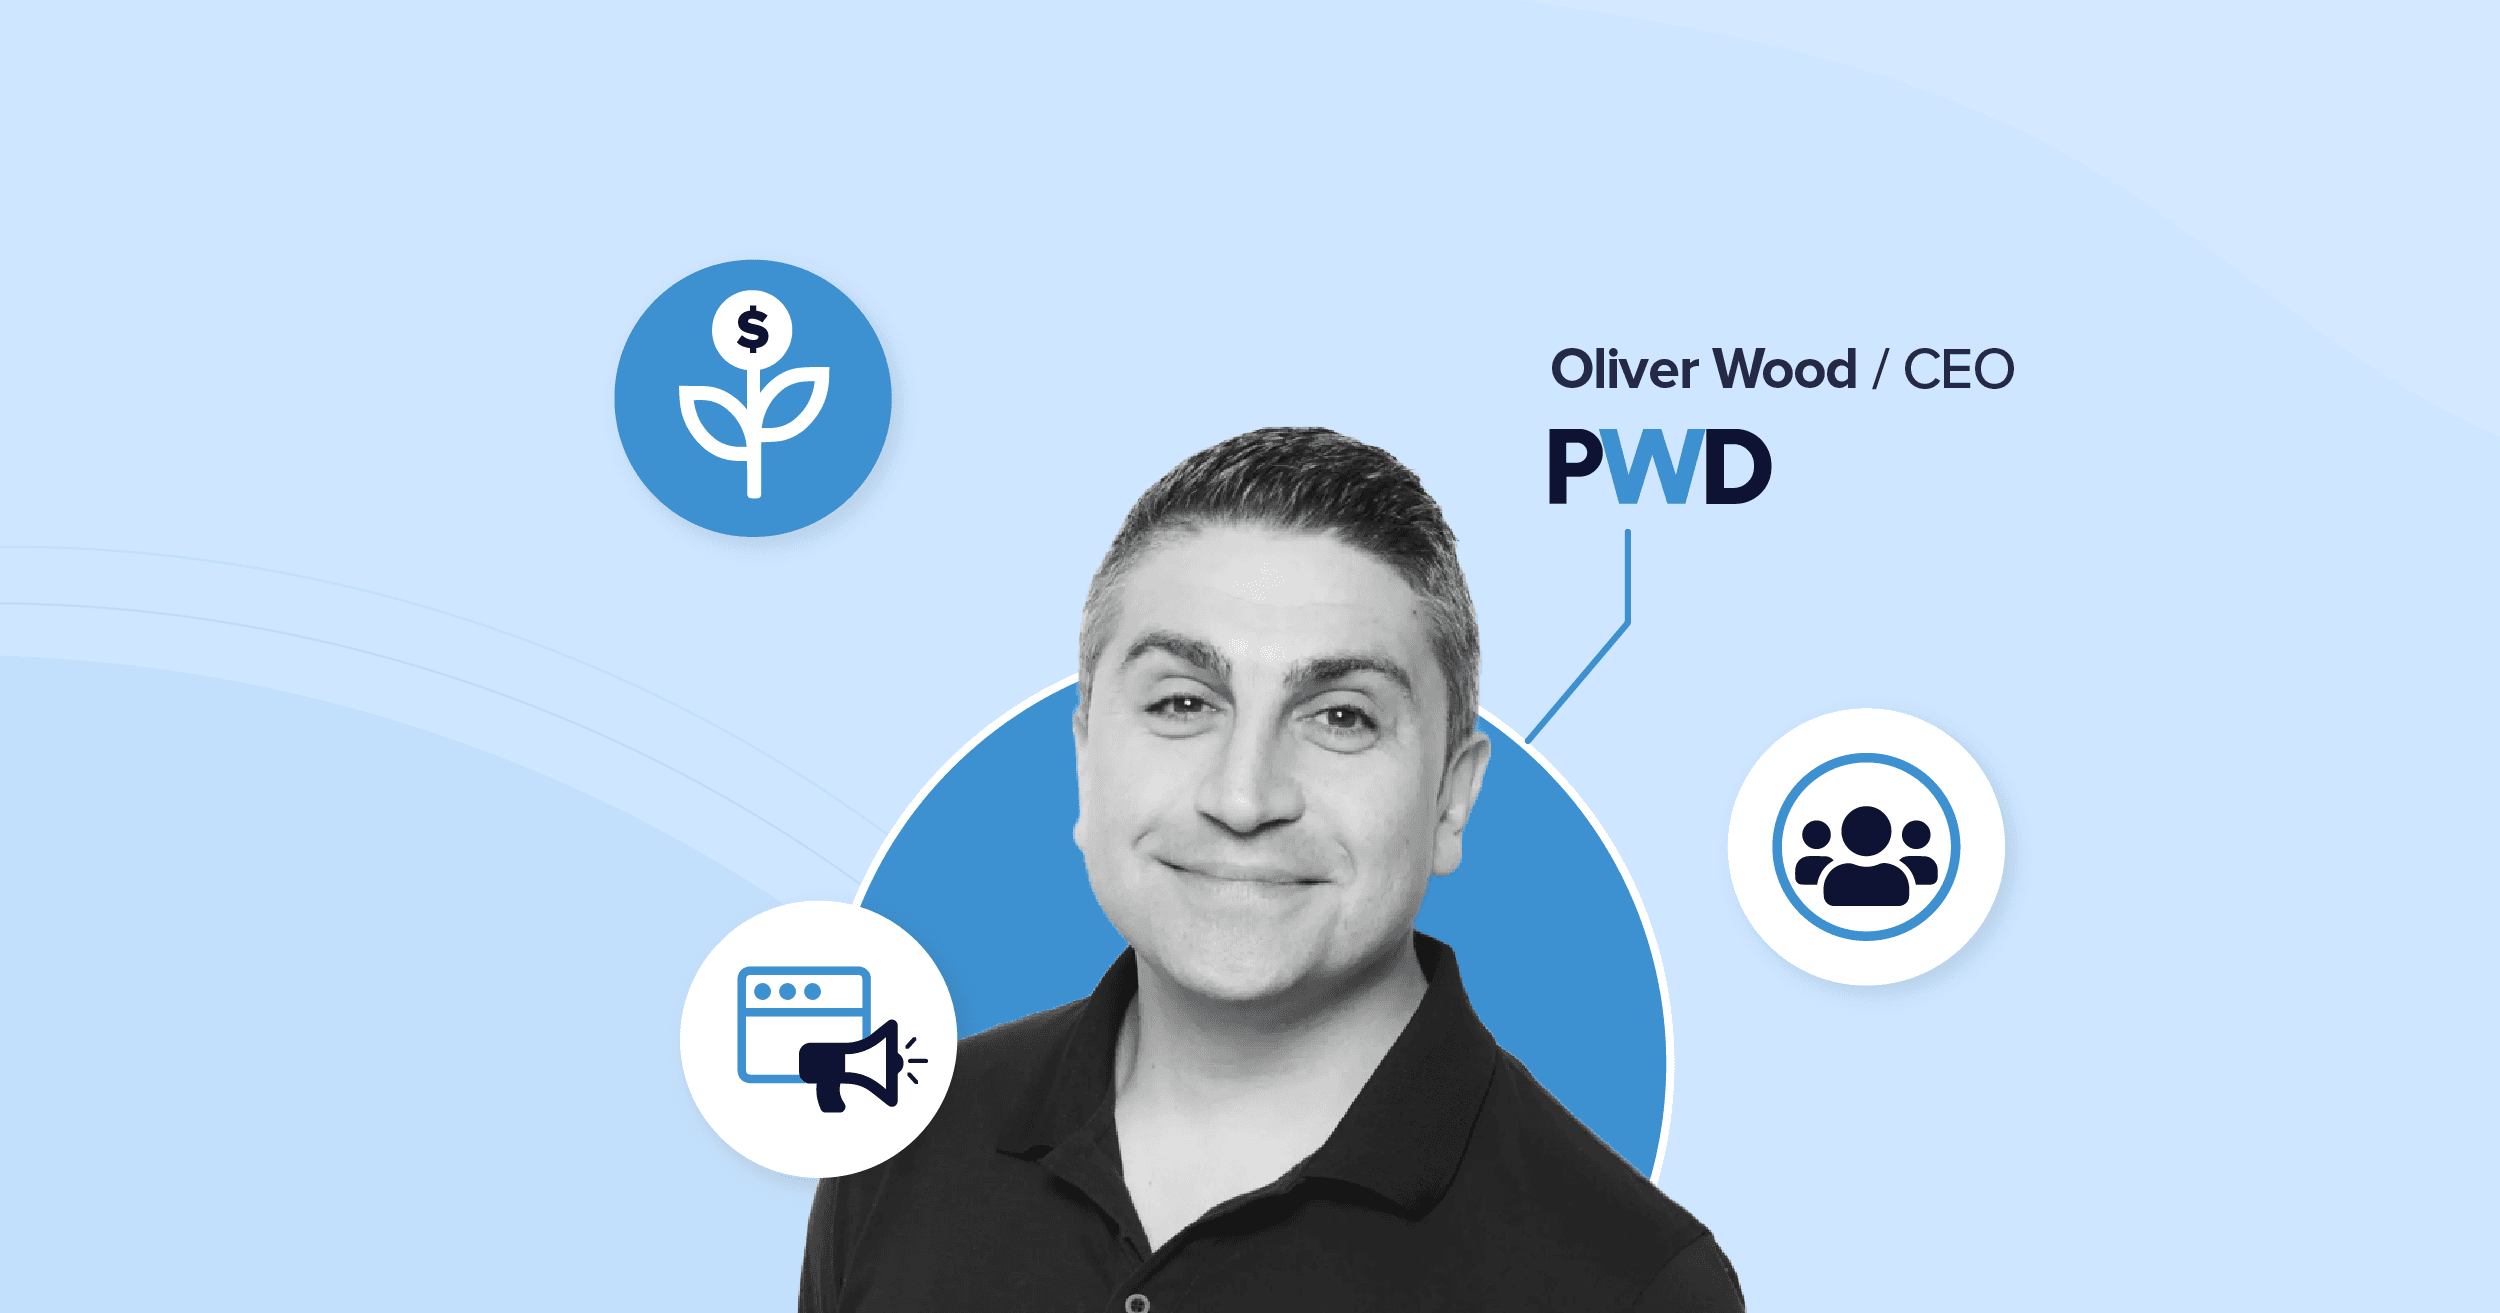 Oliver Wood, CEO of PWD